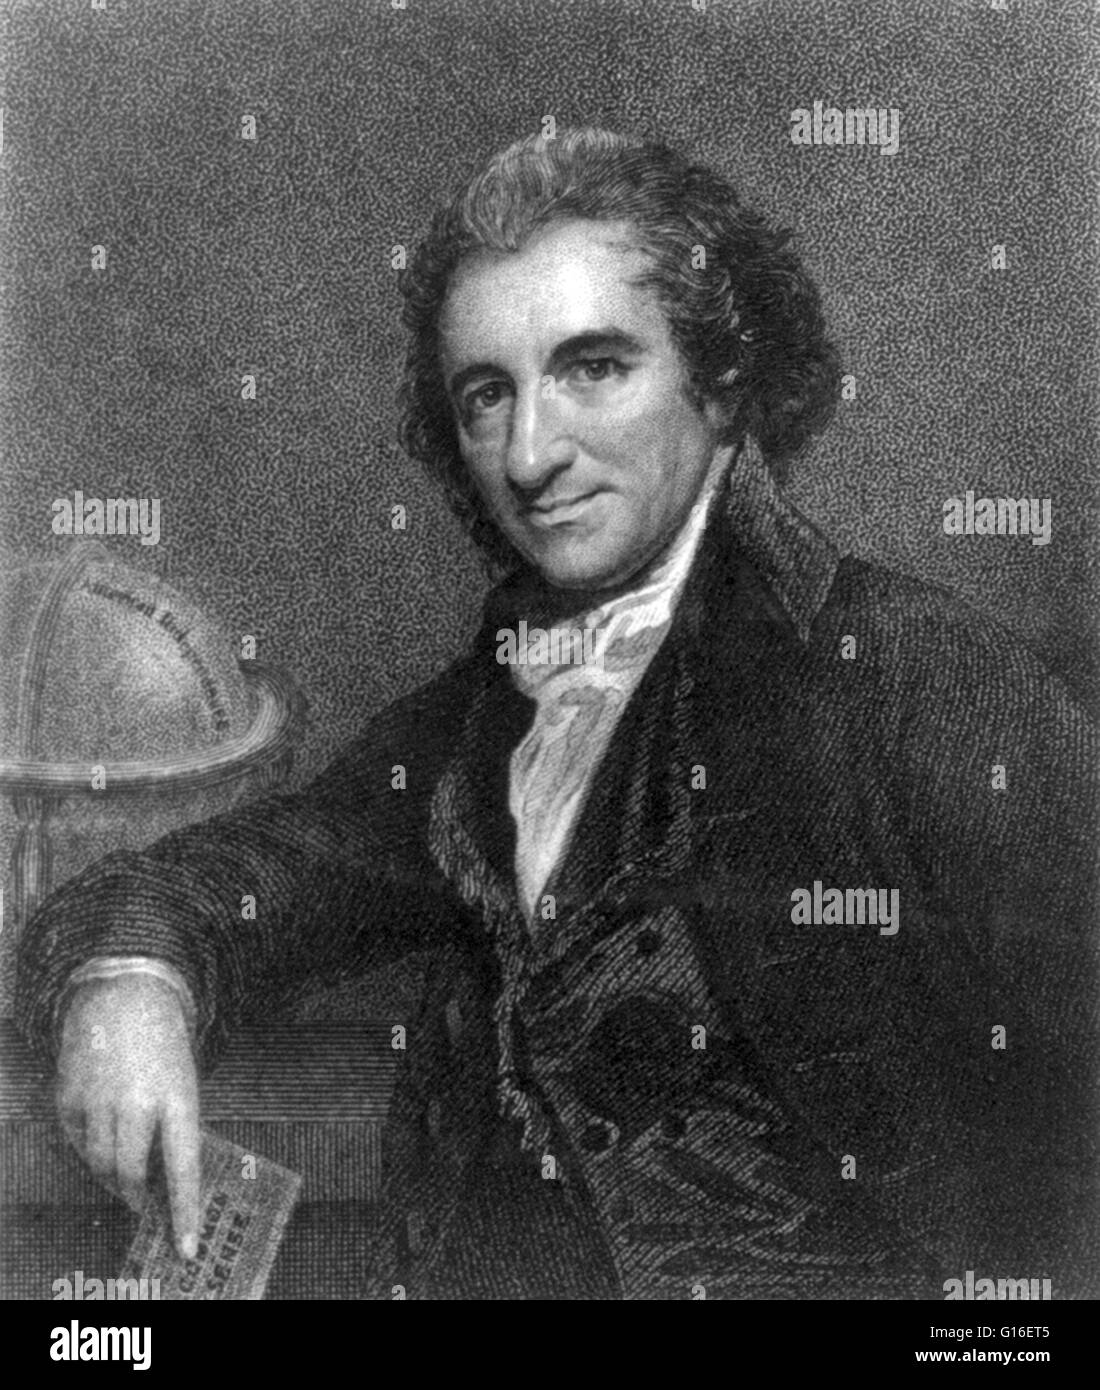 Thomas Paine (February 9, 1737 - June 8, 1809) was an American political activist, philosopher, political theorist, revolutionary and one of the Founding Fathers of the United States. His pamphlet Common Sense inspired people to declare and fight for inde Stock Photo